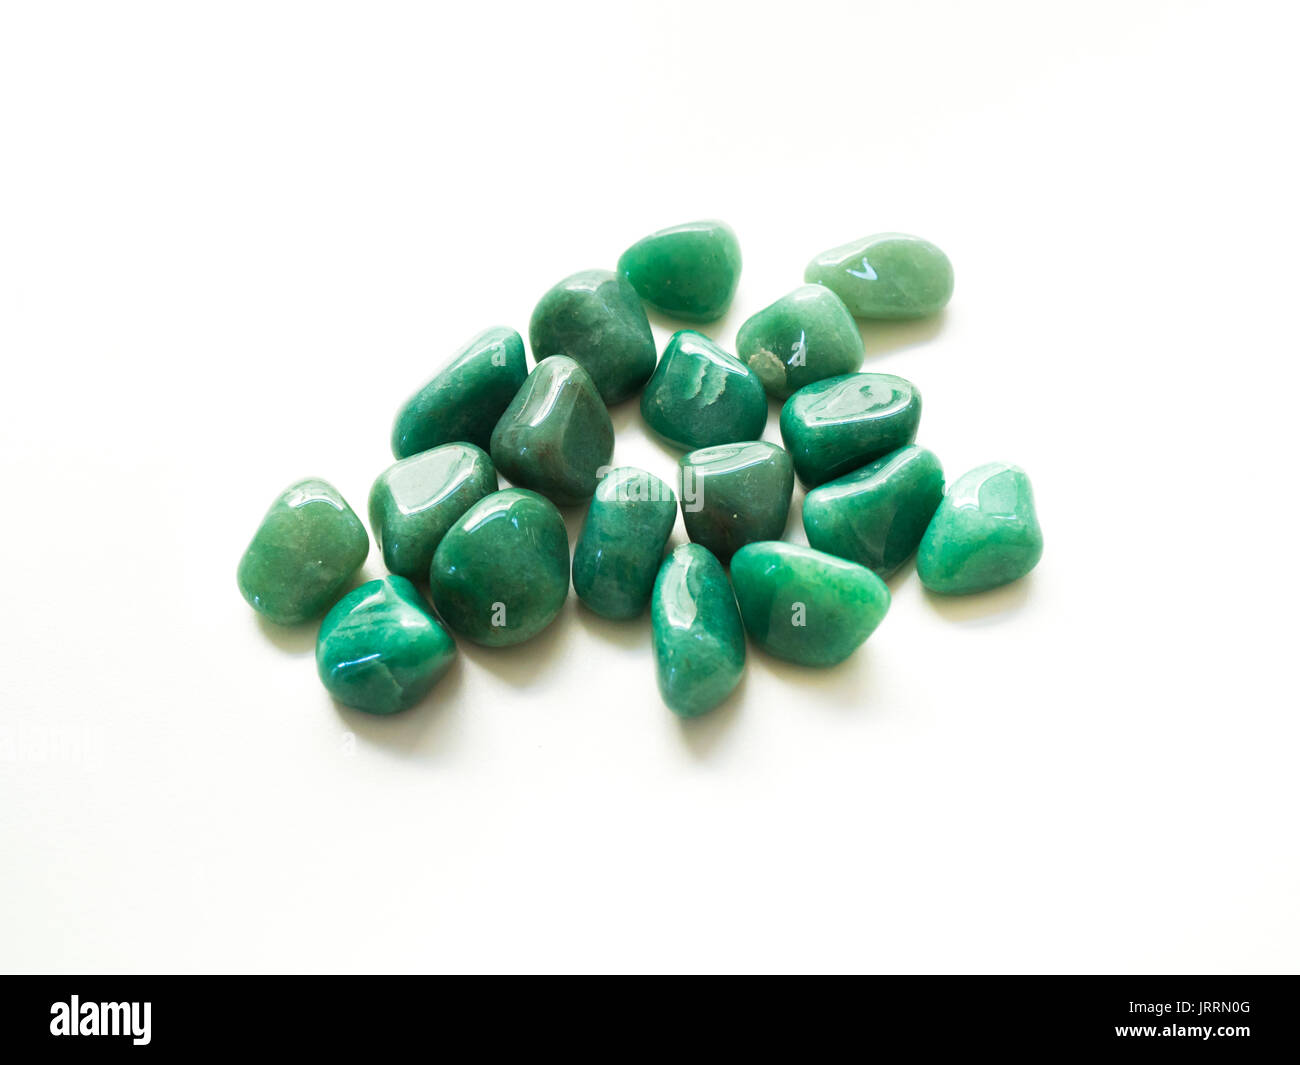 Tumbled aventurine stones for crystal therapy treatments and reiki detail Stock Photo